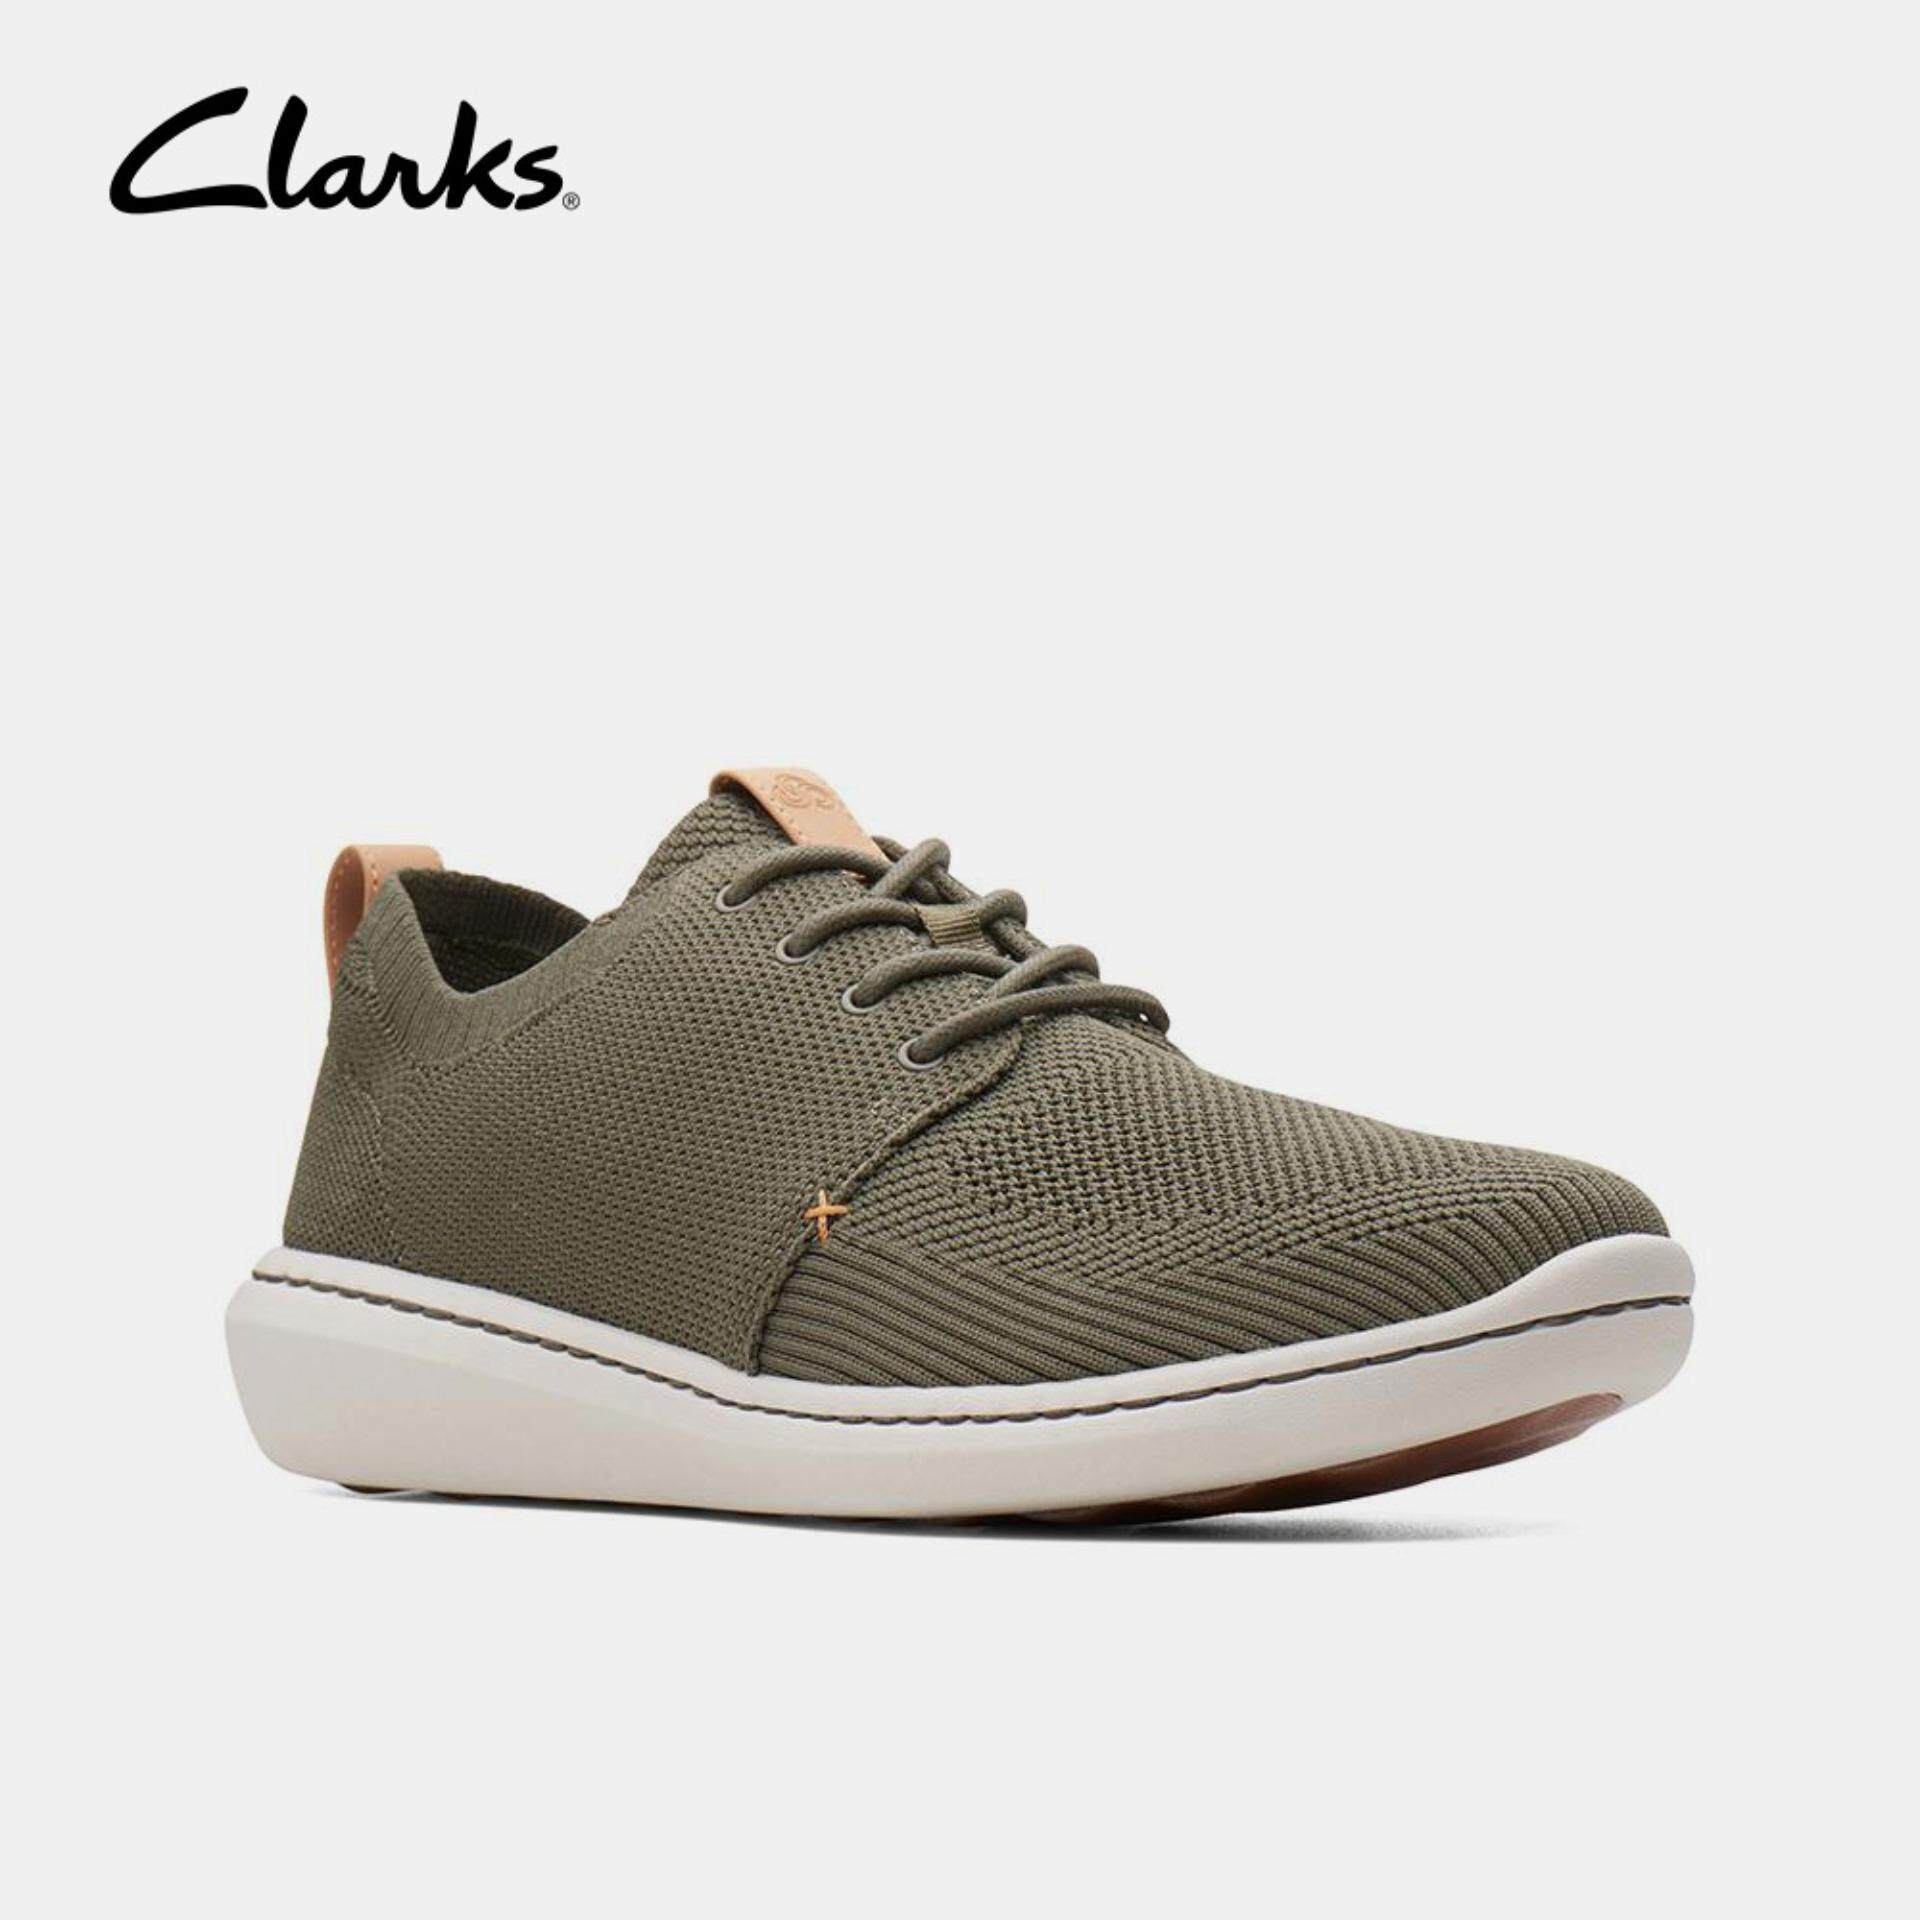 cloudsteppers by clarks malaysia